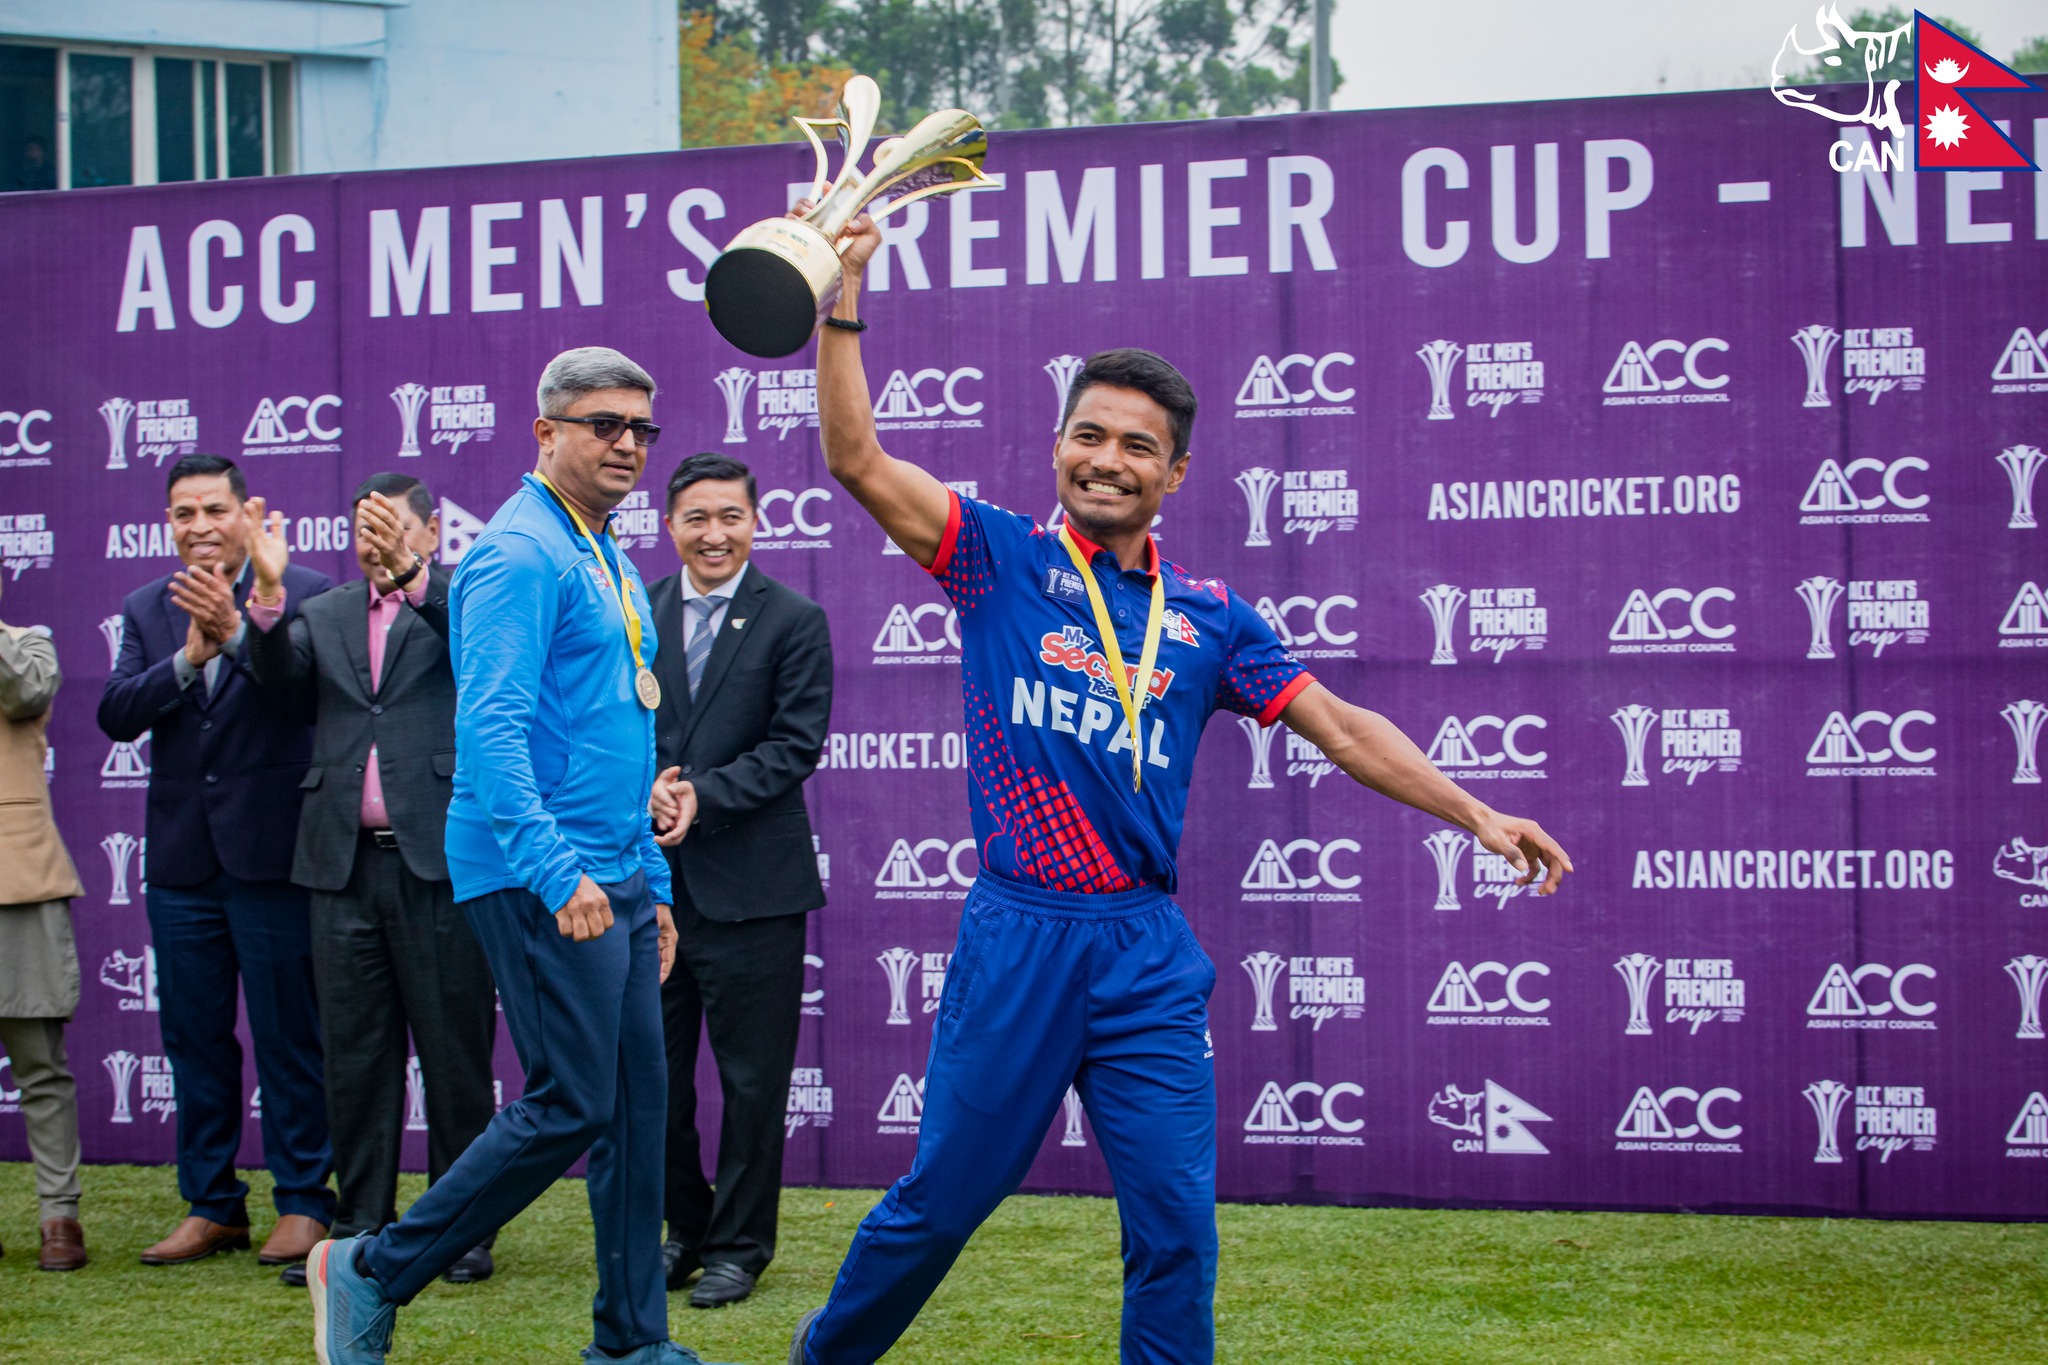 Rohit Paudel with ACC Premier Cup 2023 trophy. Photo: CAN